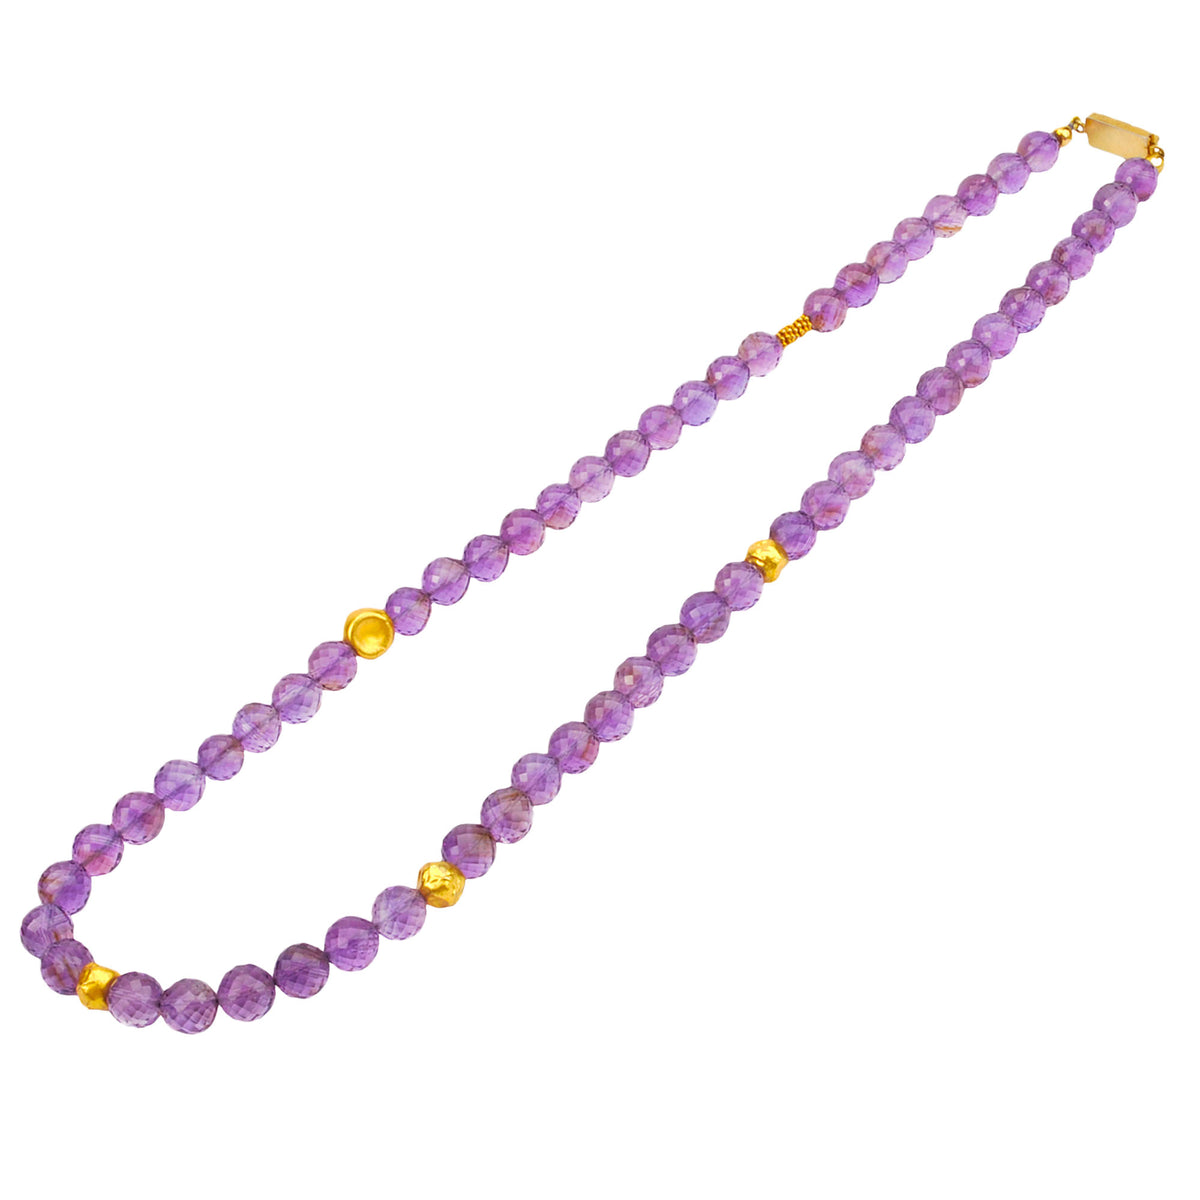 Amethyst beads single strand necklace in silver